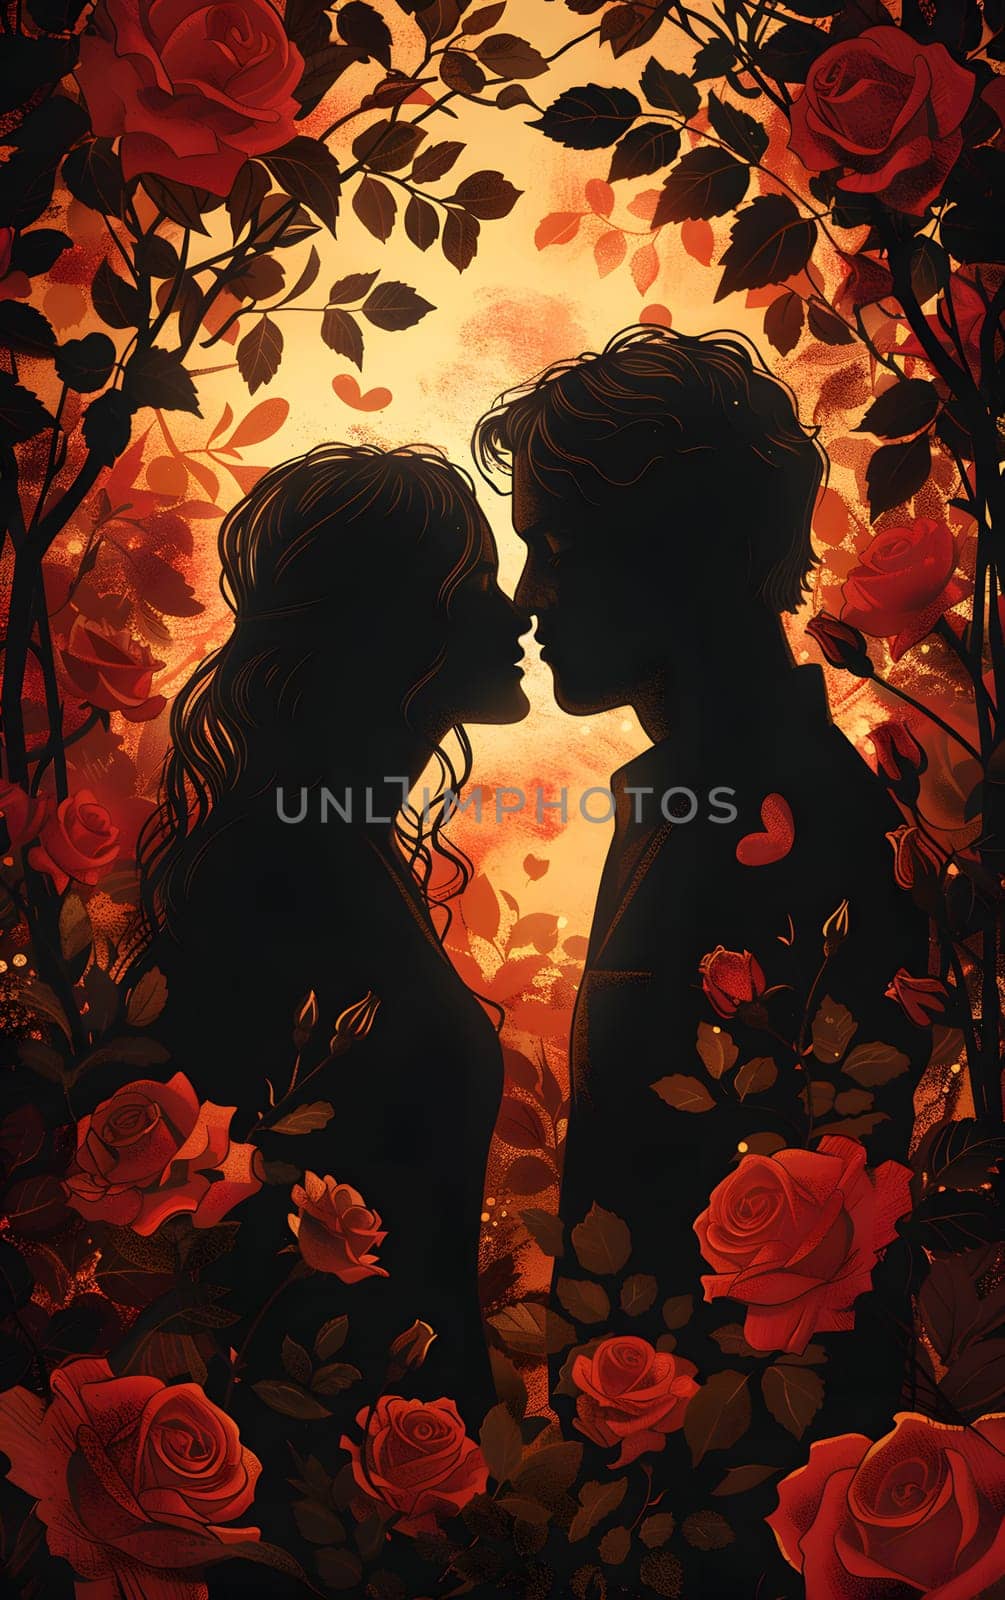 A couple is locked in a loving embrace amidst a garden filled with vibrant red roses, creating a beautiful and romantic scene